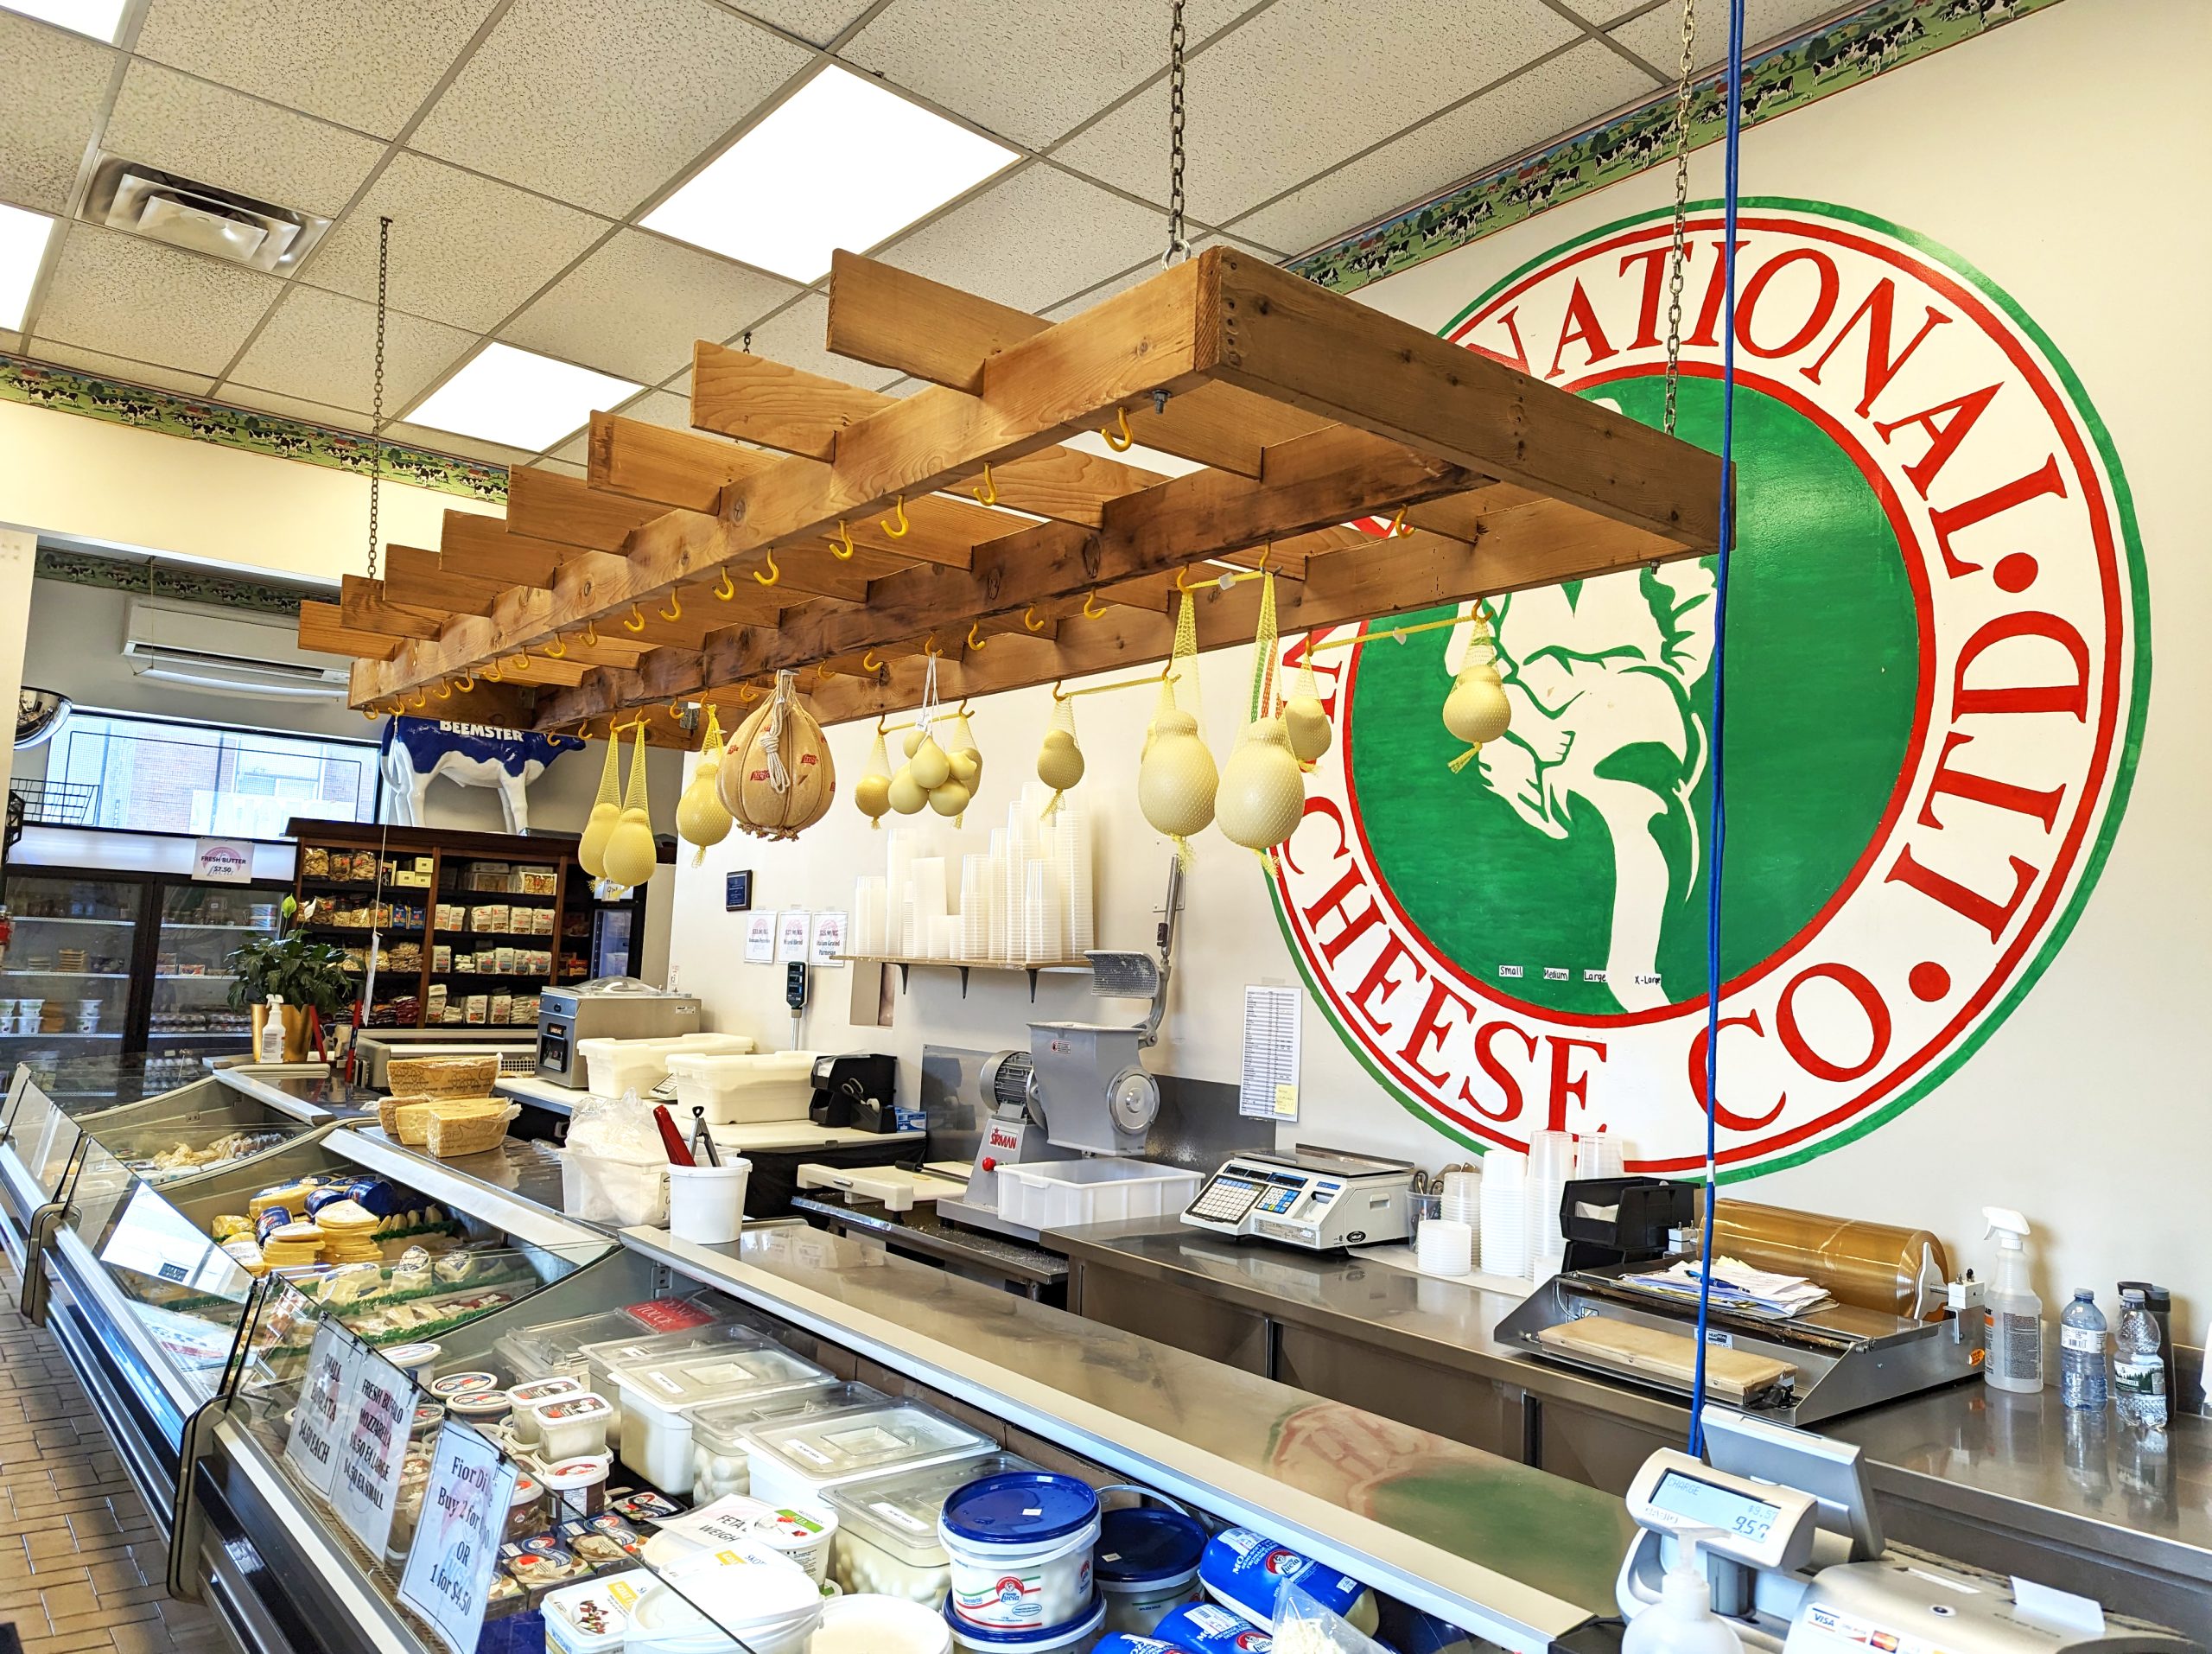 Toronto Home Painting: Interior Commercial Painting of International Cheese Factory Shop in Toronto